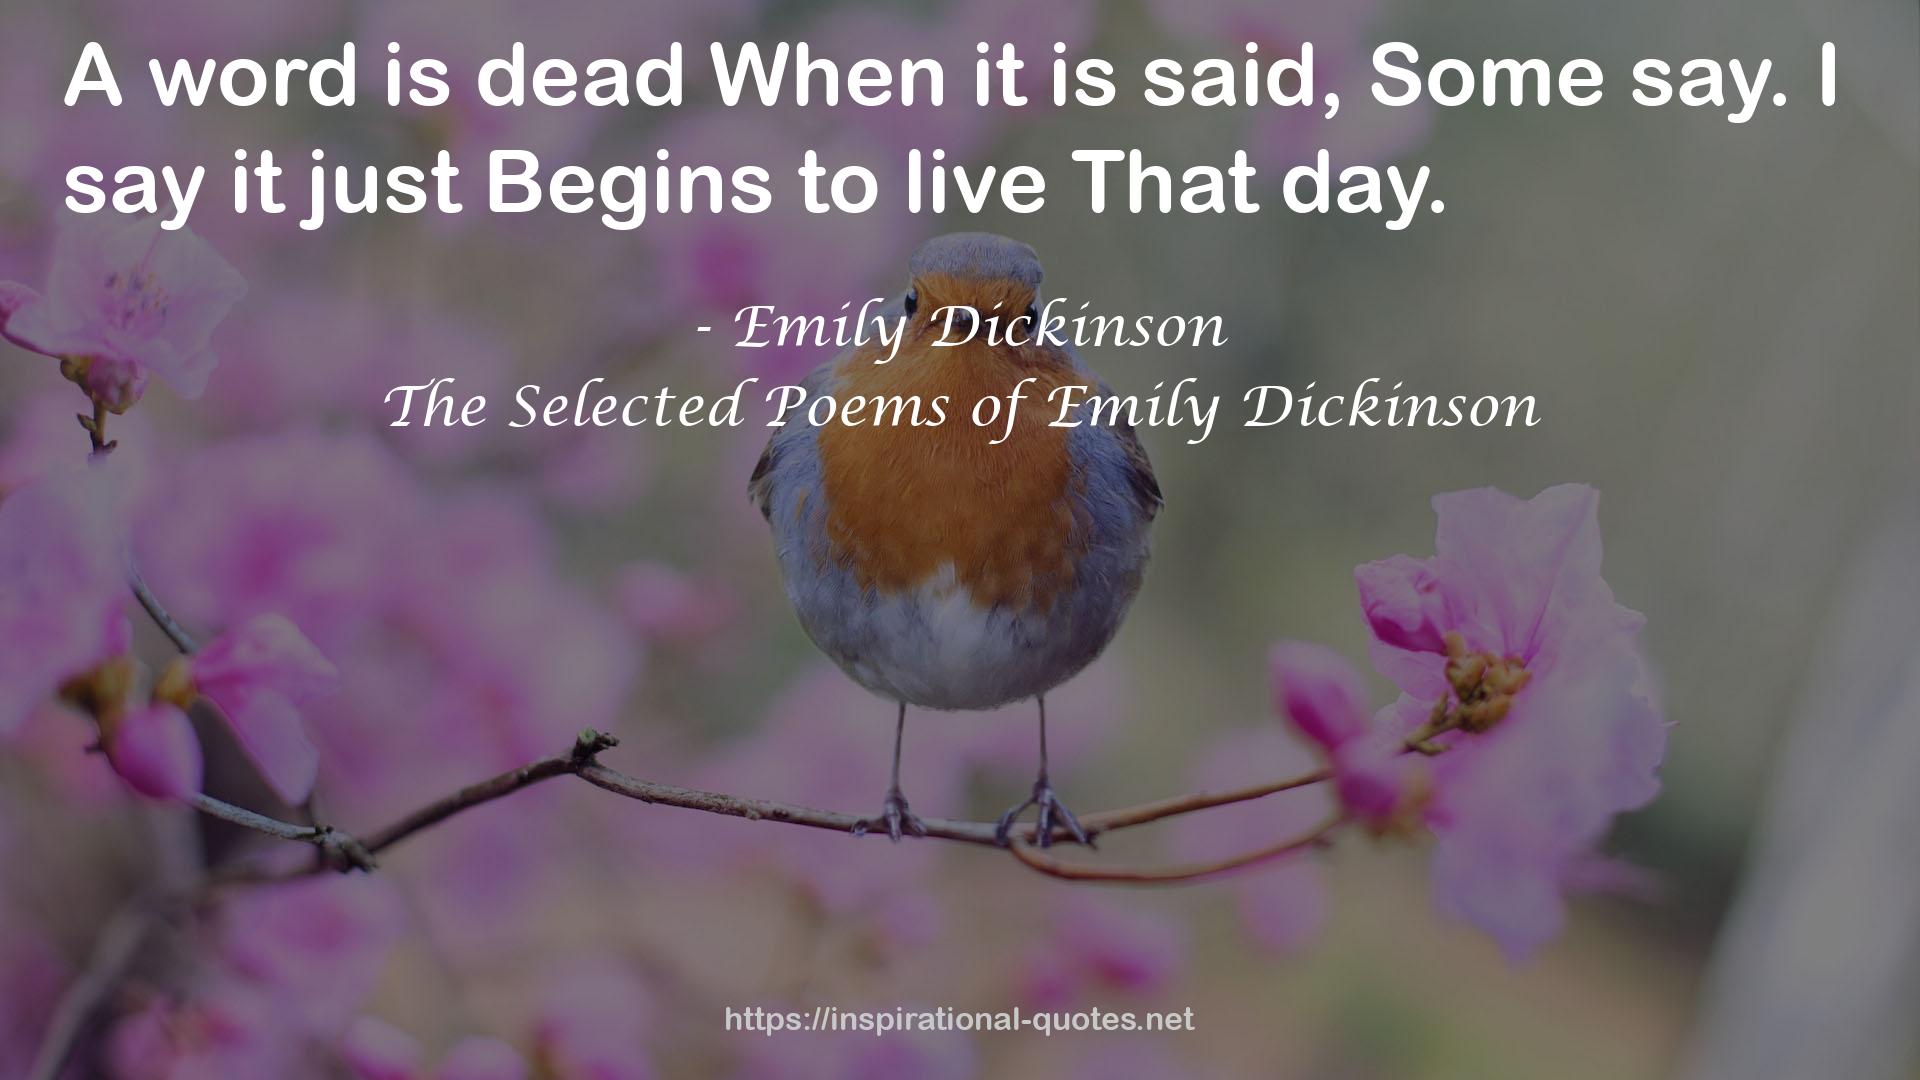 The Selected Poems of Emily Dickinson QUOTES